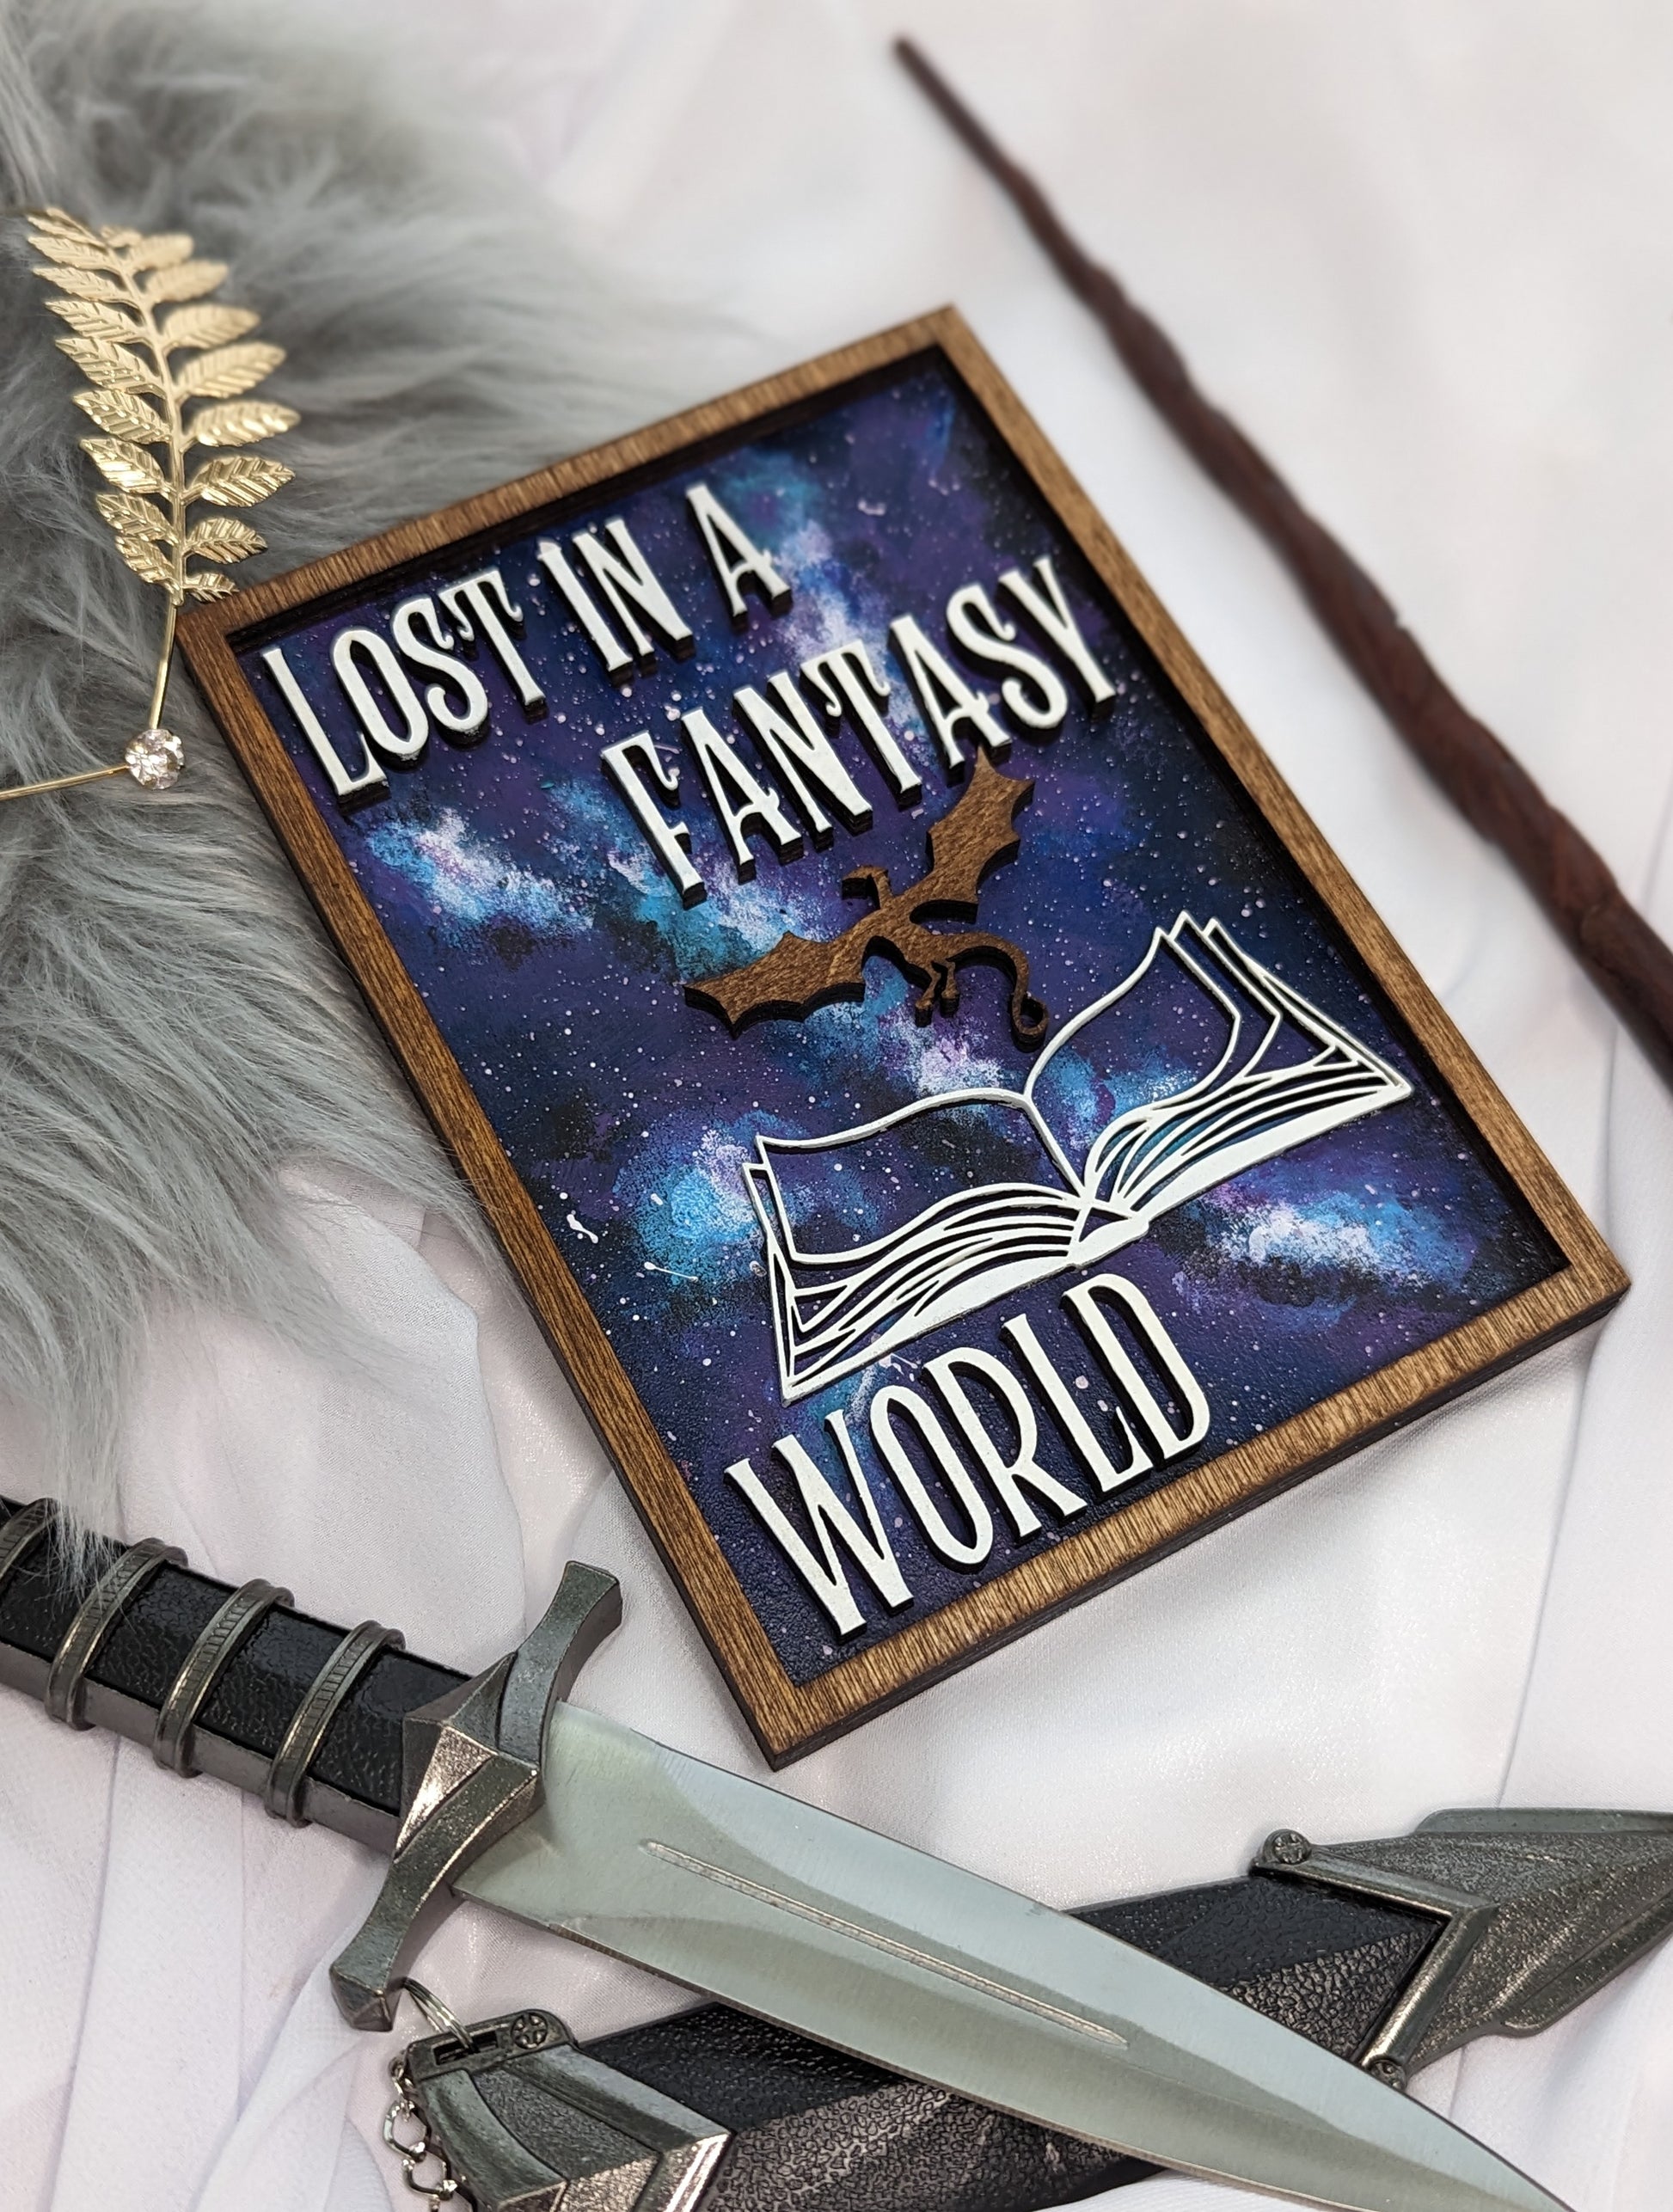 Lost in a Fantasy World | Wooden Bookshelf Sign - Quill & Cauldron